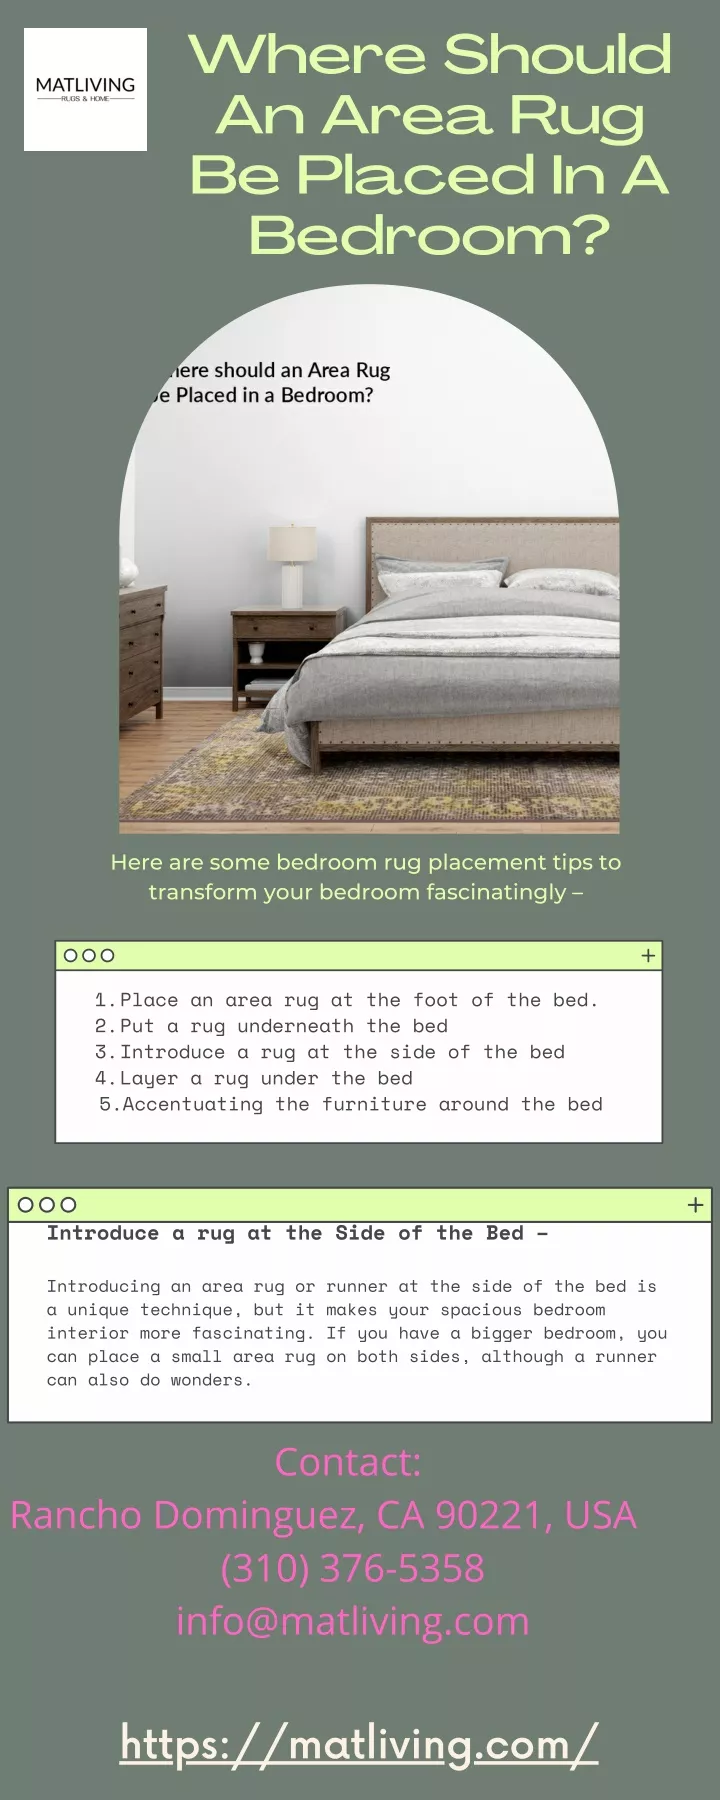 where should an area rug be placed in a bedroom